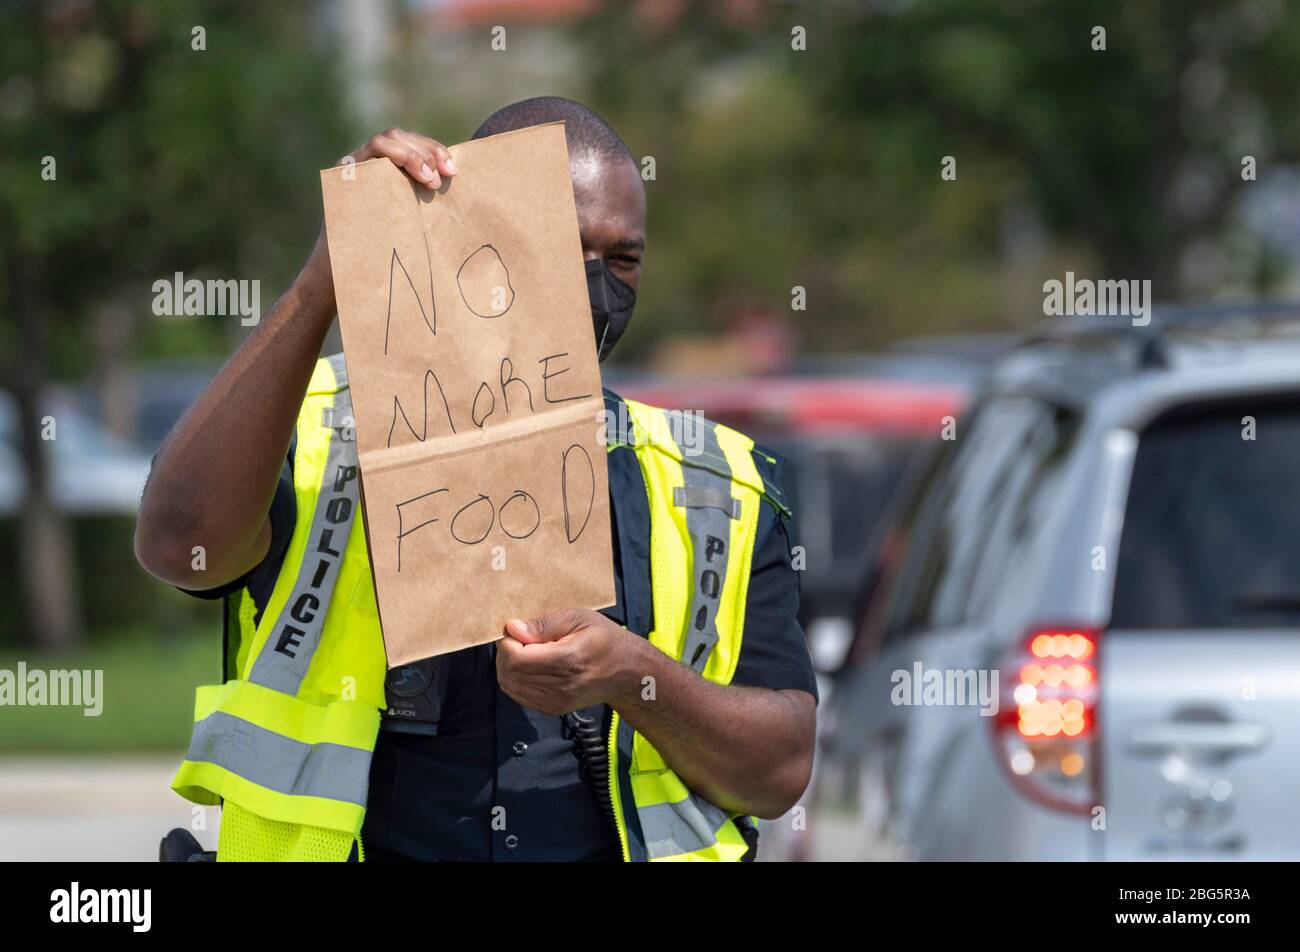 West Palm Beach, Florida, USA. 20th Apr, 2020. Police officer J. BUTLER holds a sign alerting people that there is no more at a drive-up food distribution center in the parking lot of the Palm Beach Outlets. People receive a one-week supply of a protein, fresh produce, eggs, milk, and other essential goods. The donations are limited to 800 cars on a first come first serve basis every Monday. Palm Beach Outlets partnered with Feeding South Florida to help those struggling during the coronavirus pandemic. Credit: Gregg Lovett/ZUMA Wire/Alamy Live News Stock Photo